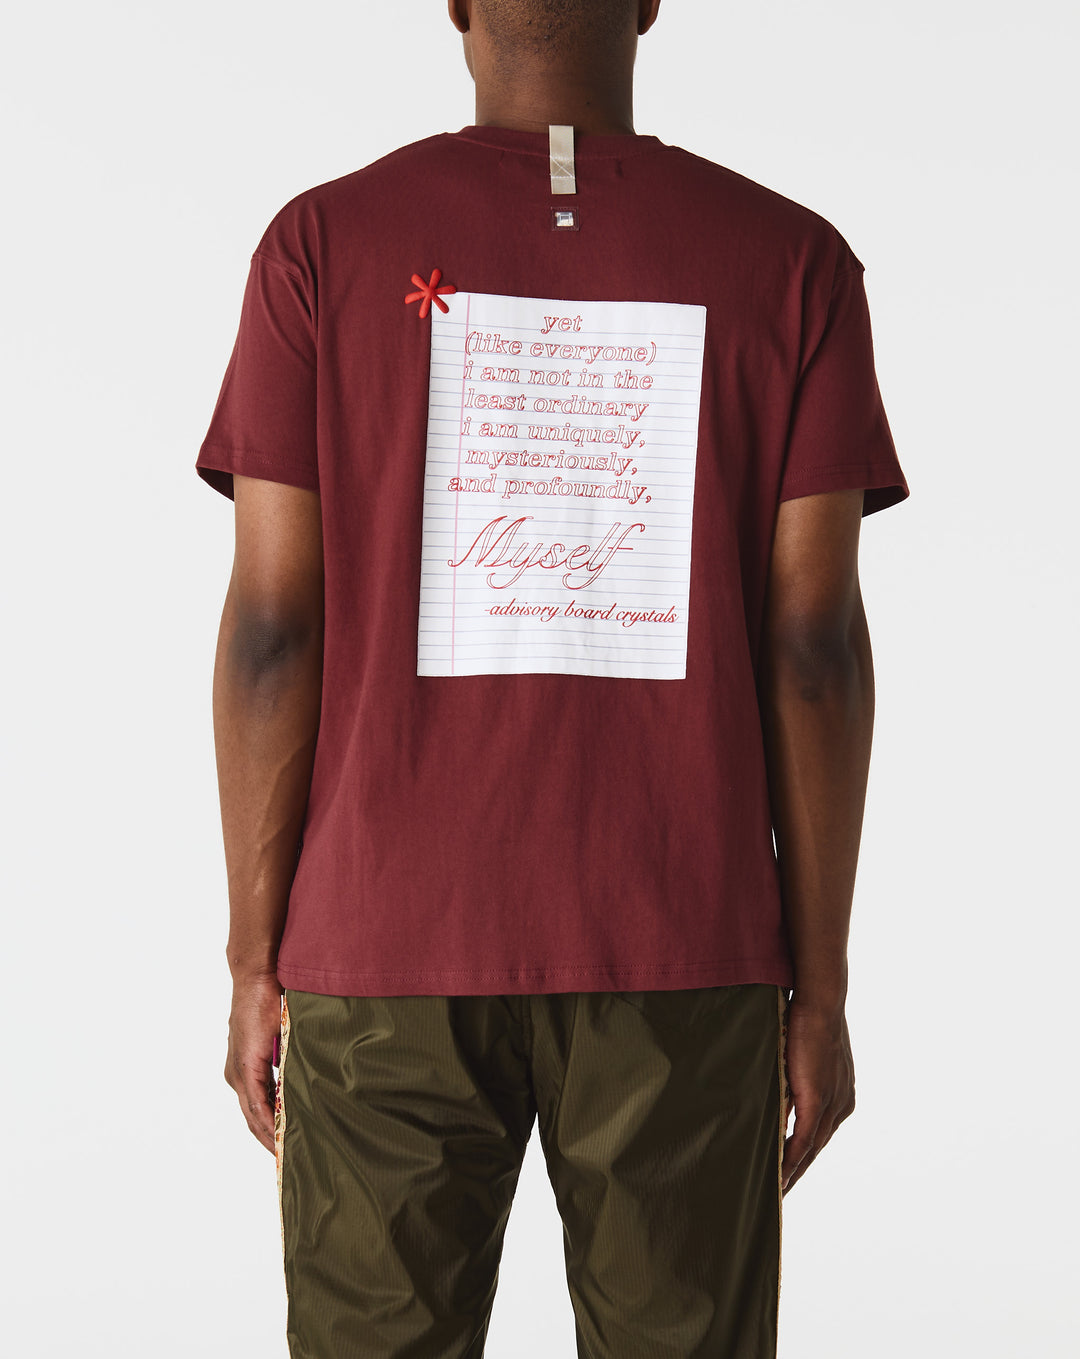 Advisory Board Crystals The Gap soft cotton jersey T-shirt features embossed arch logo appliqu  - Cheap 127-0 Jordan outlet